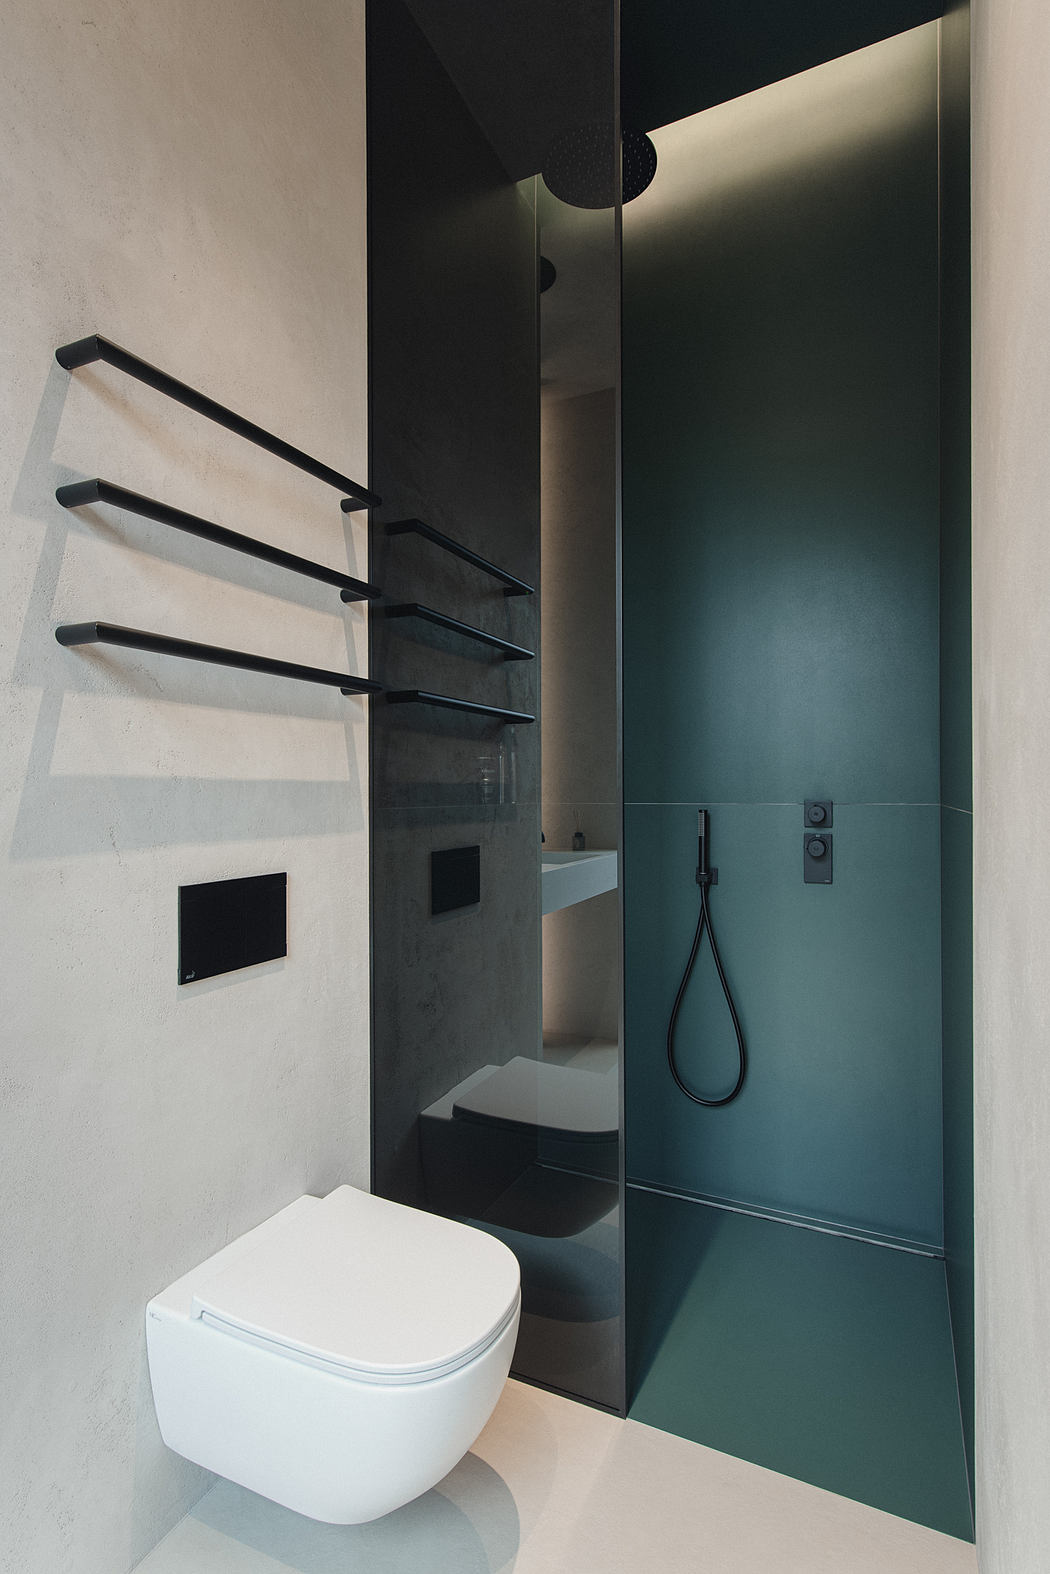 A minimalist bathroom with a black and white color scheme, wall-mounted shelves, and a sleek shower enclosure.